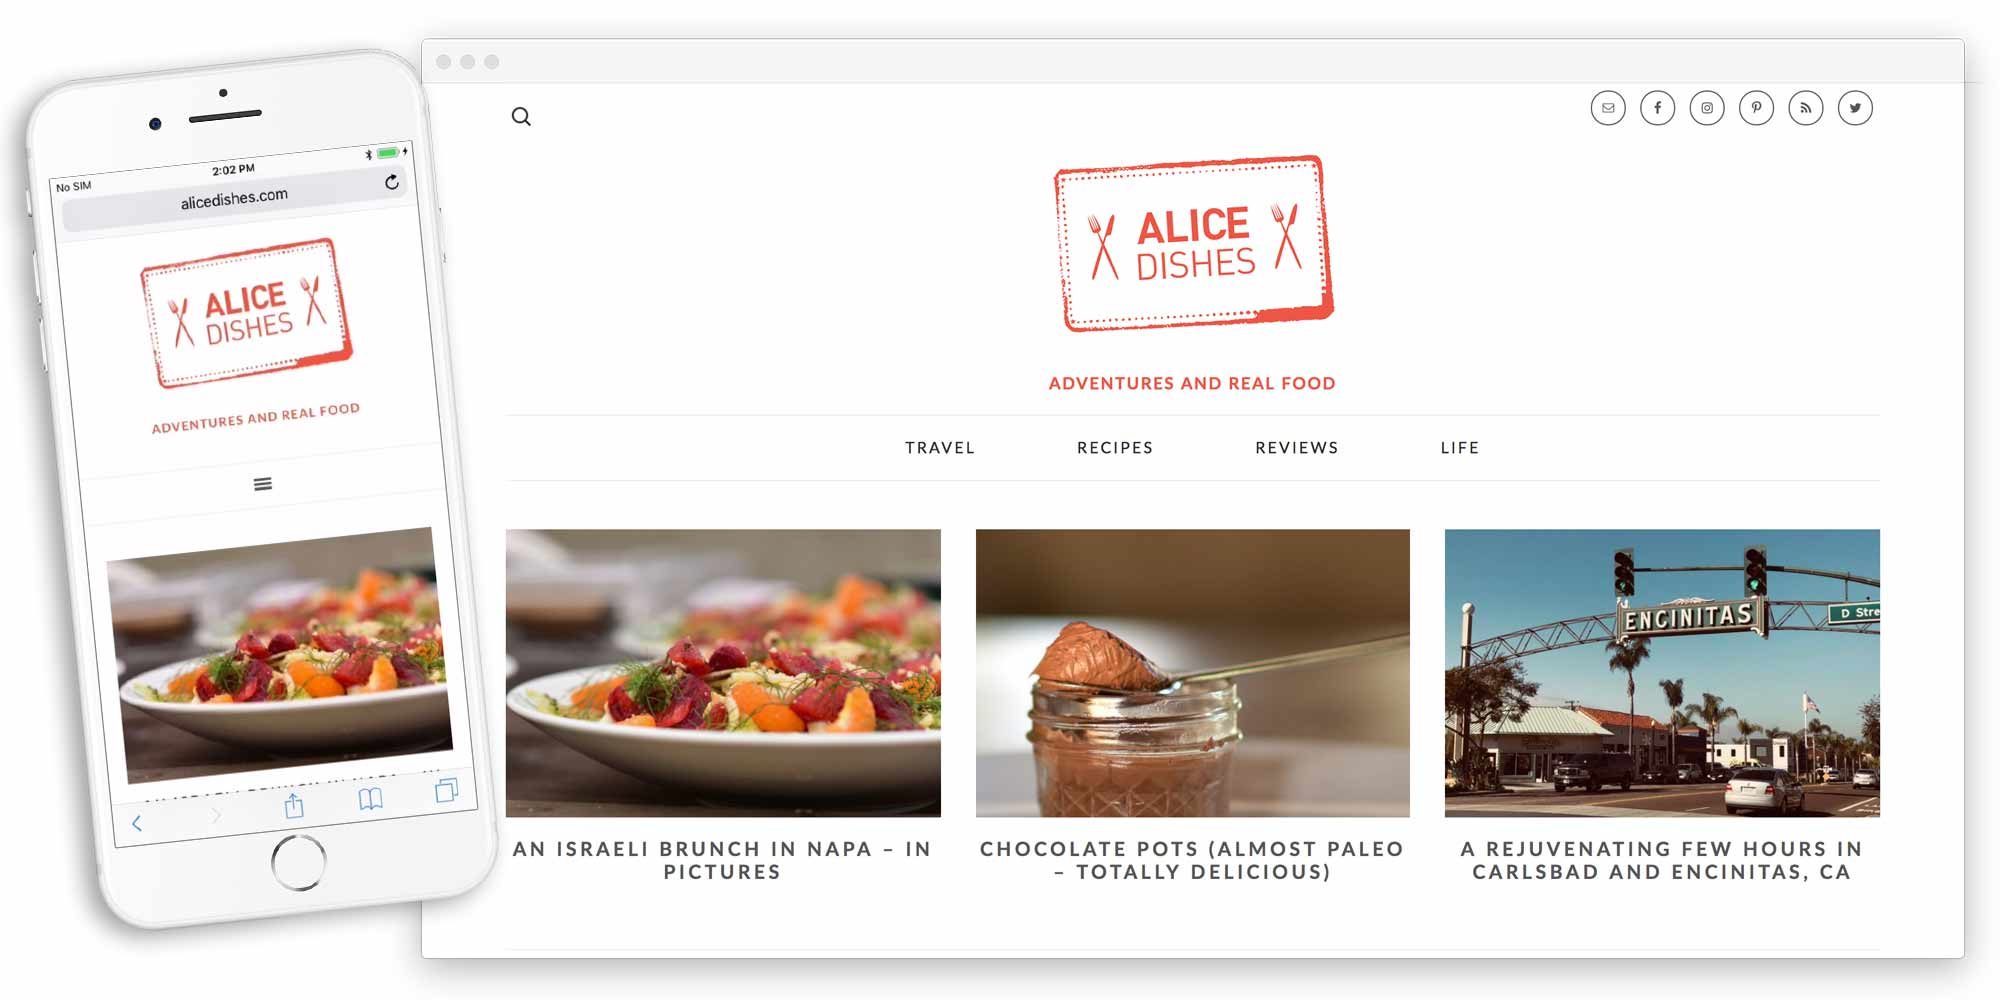 alice dishes website by lobstervine